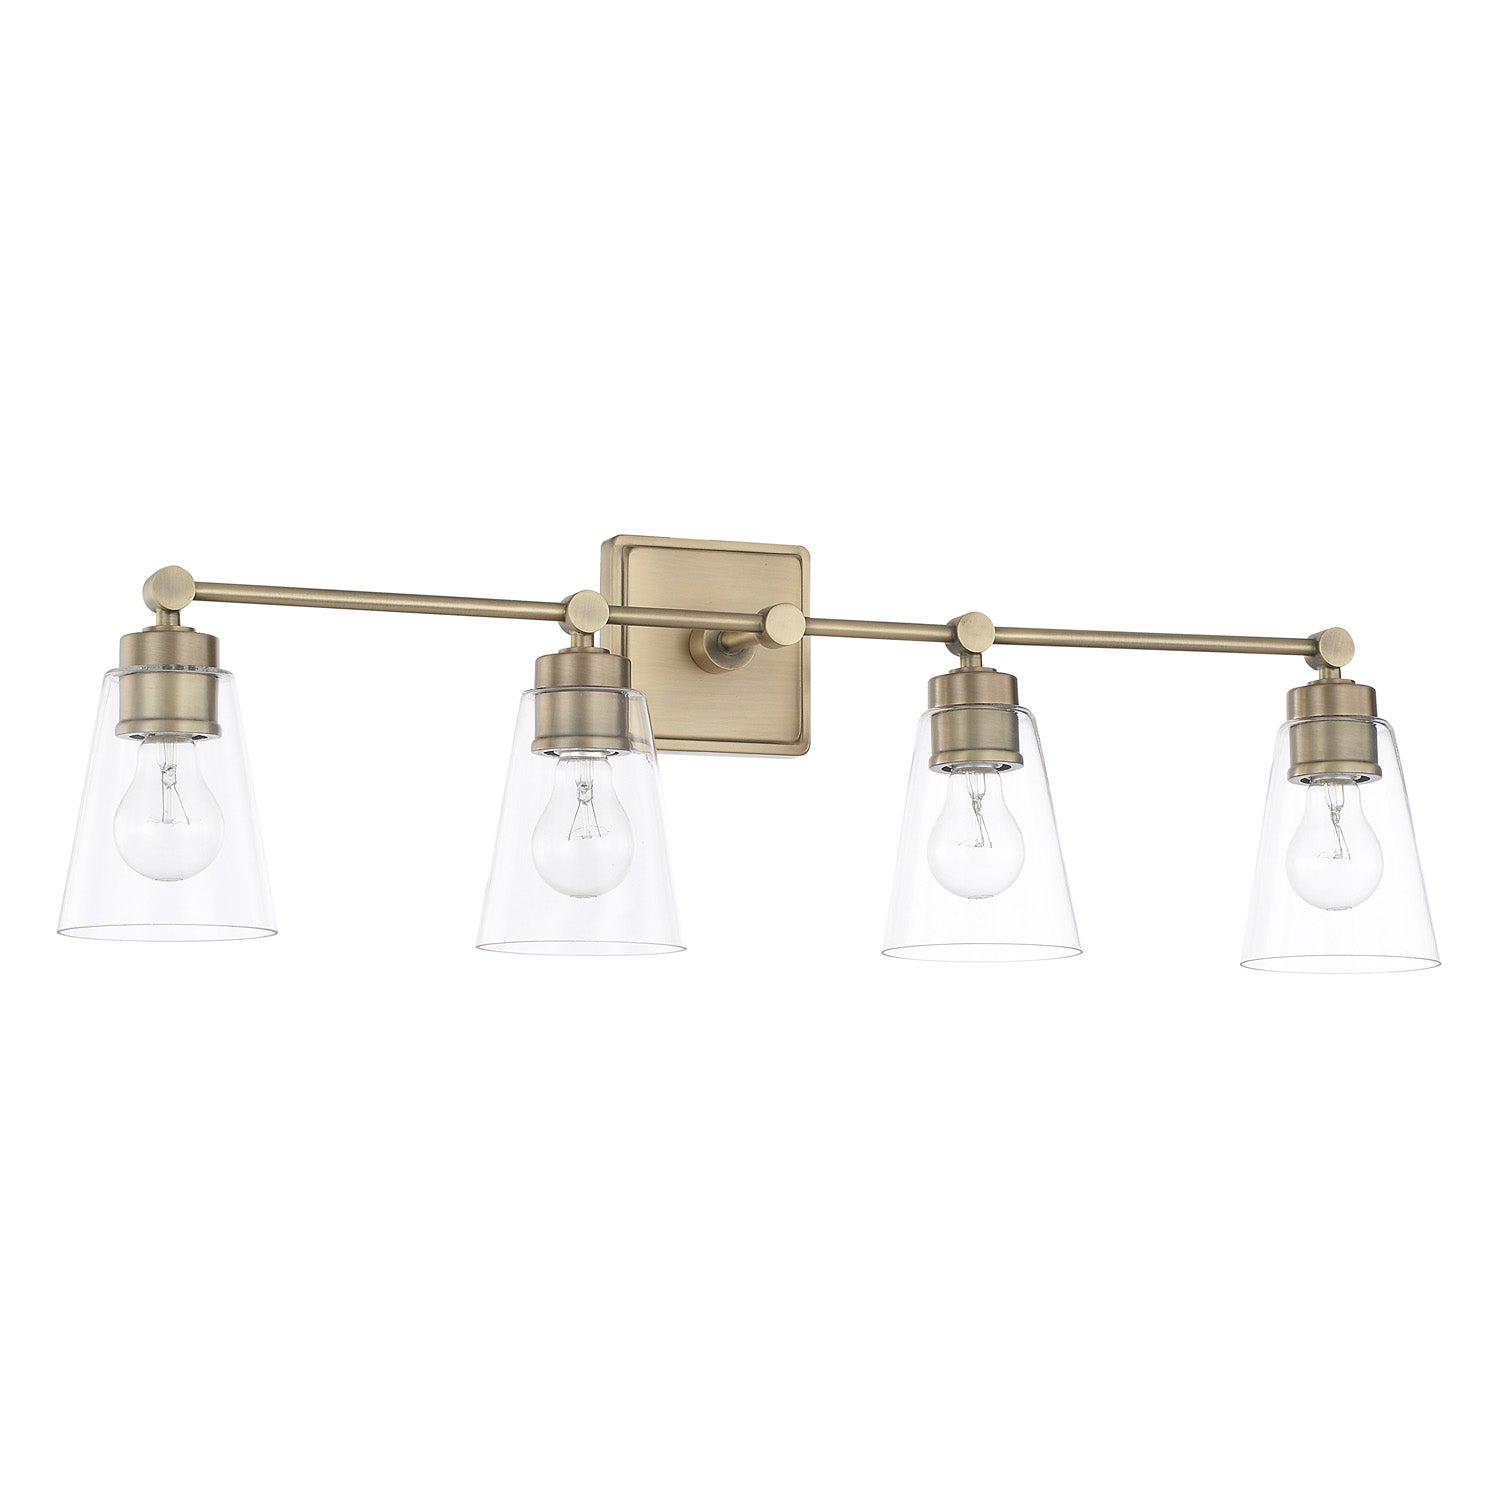 Capital Rory 121841AD-432 Bath Vanity Light 33 in. wide - Aged Brass